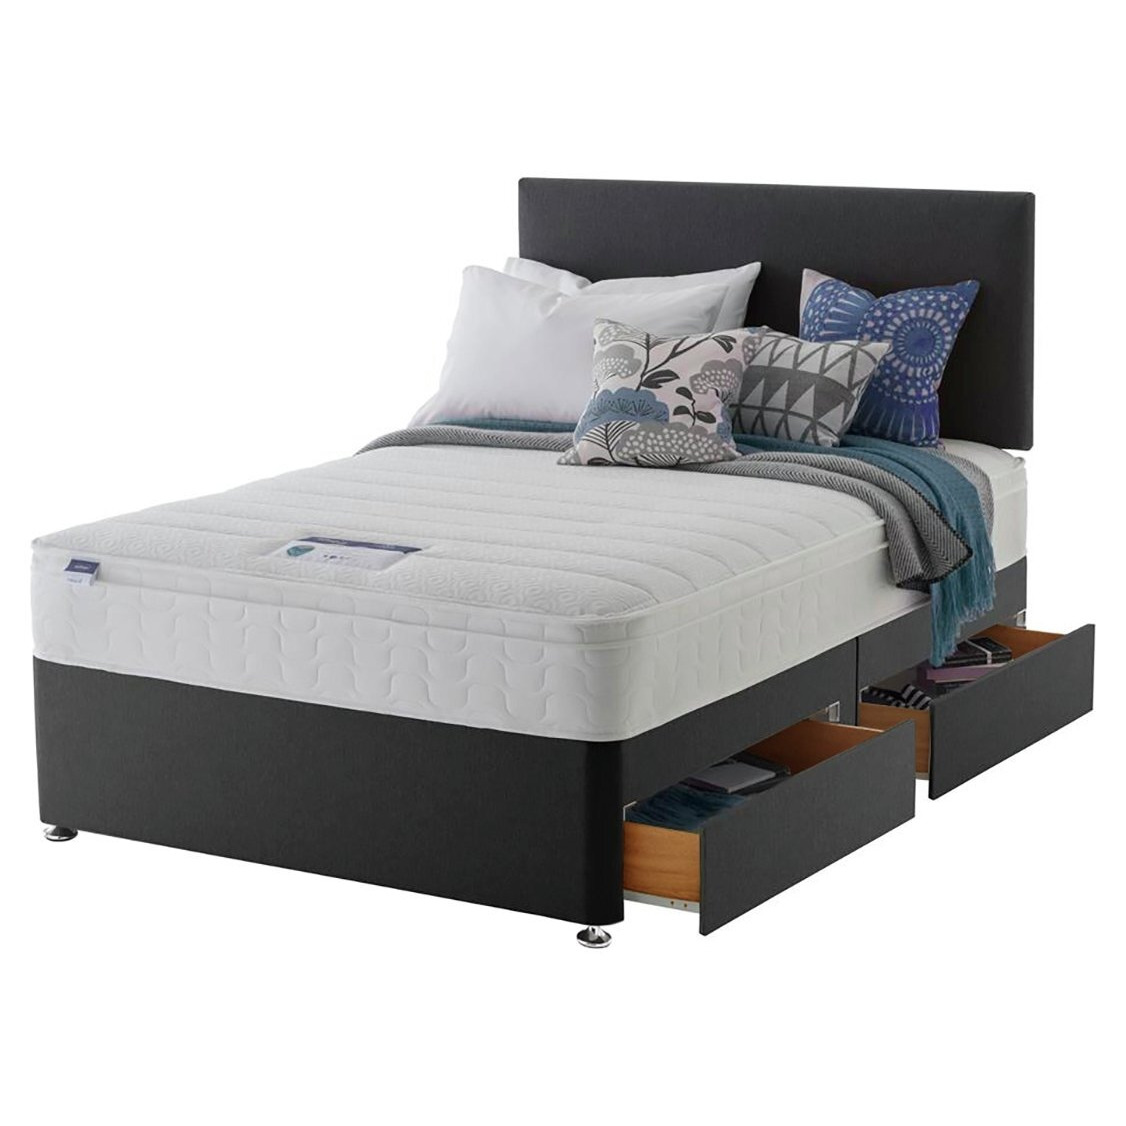 Silentnight Travis Small Double 4 Drawer Divan Bed- Charcoal - image 1